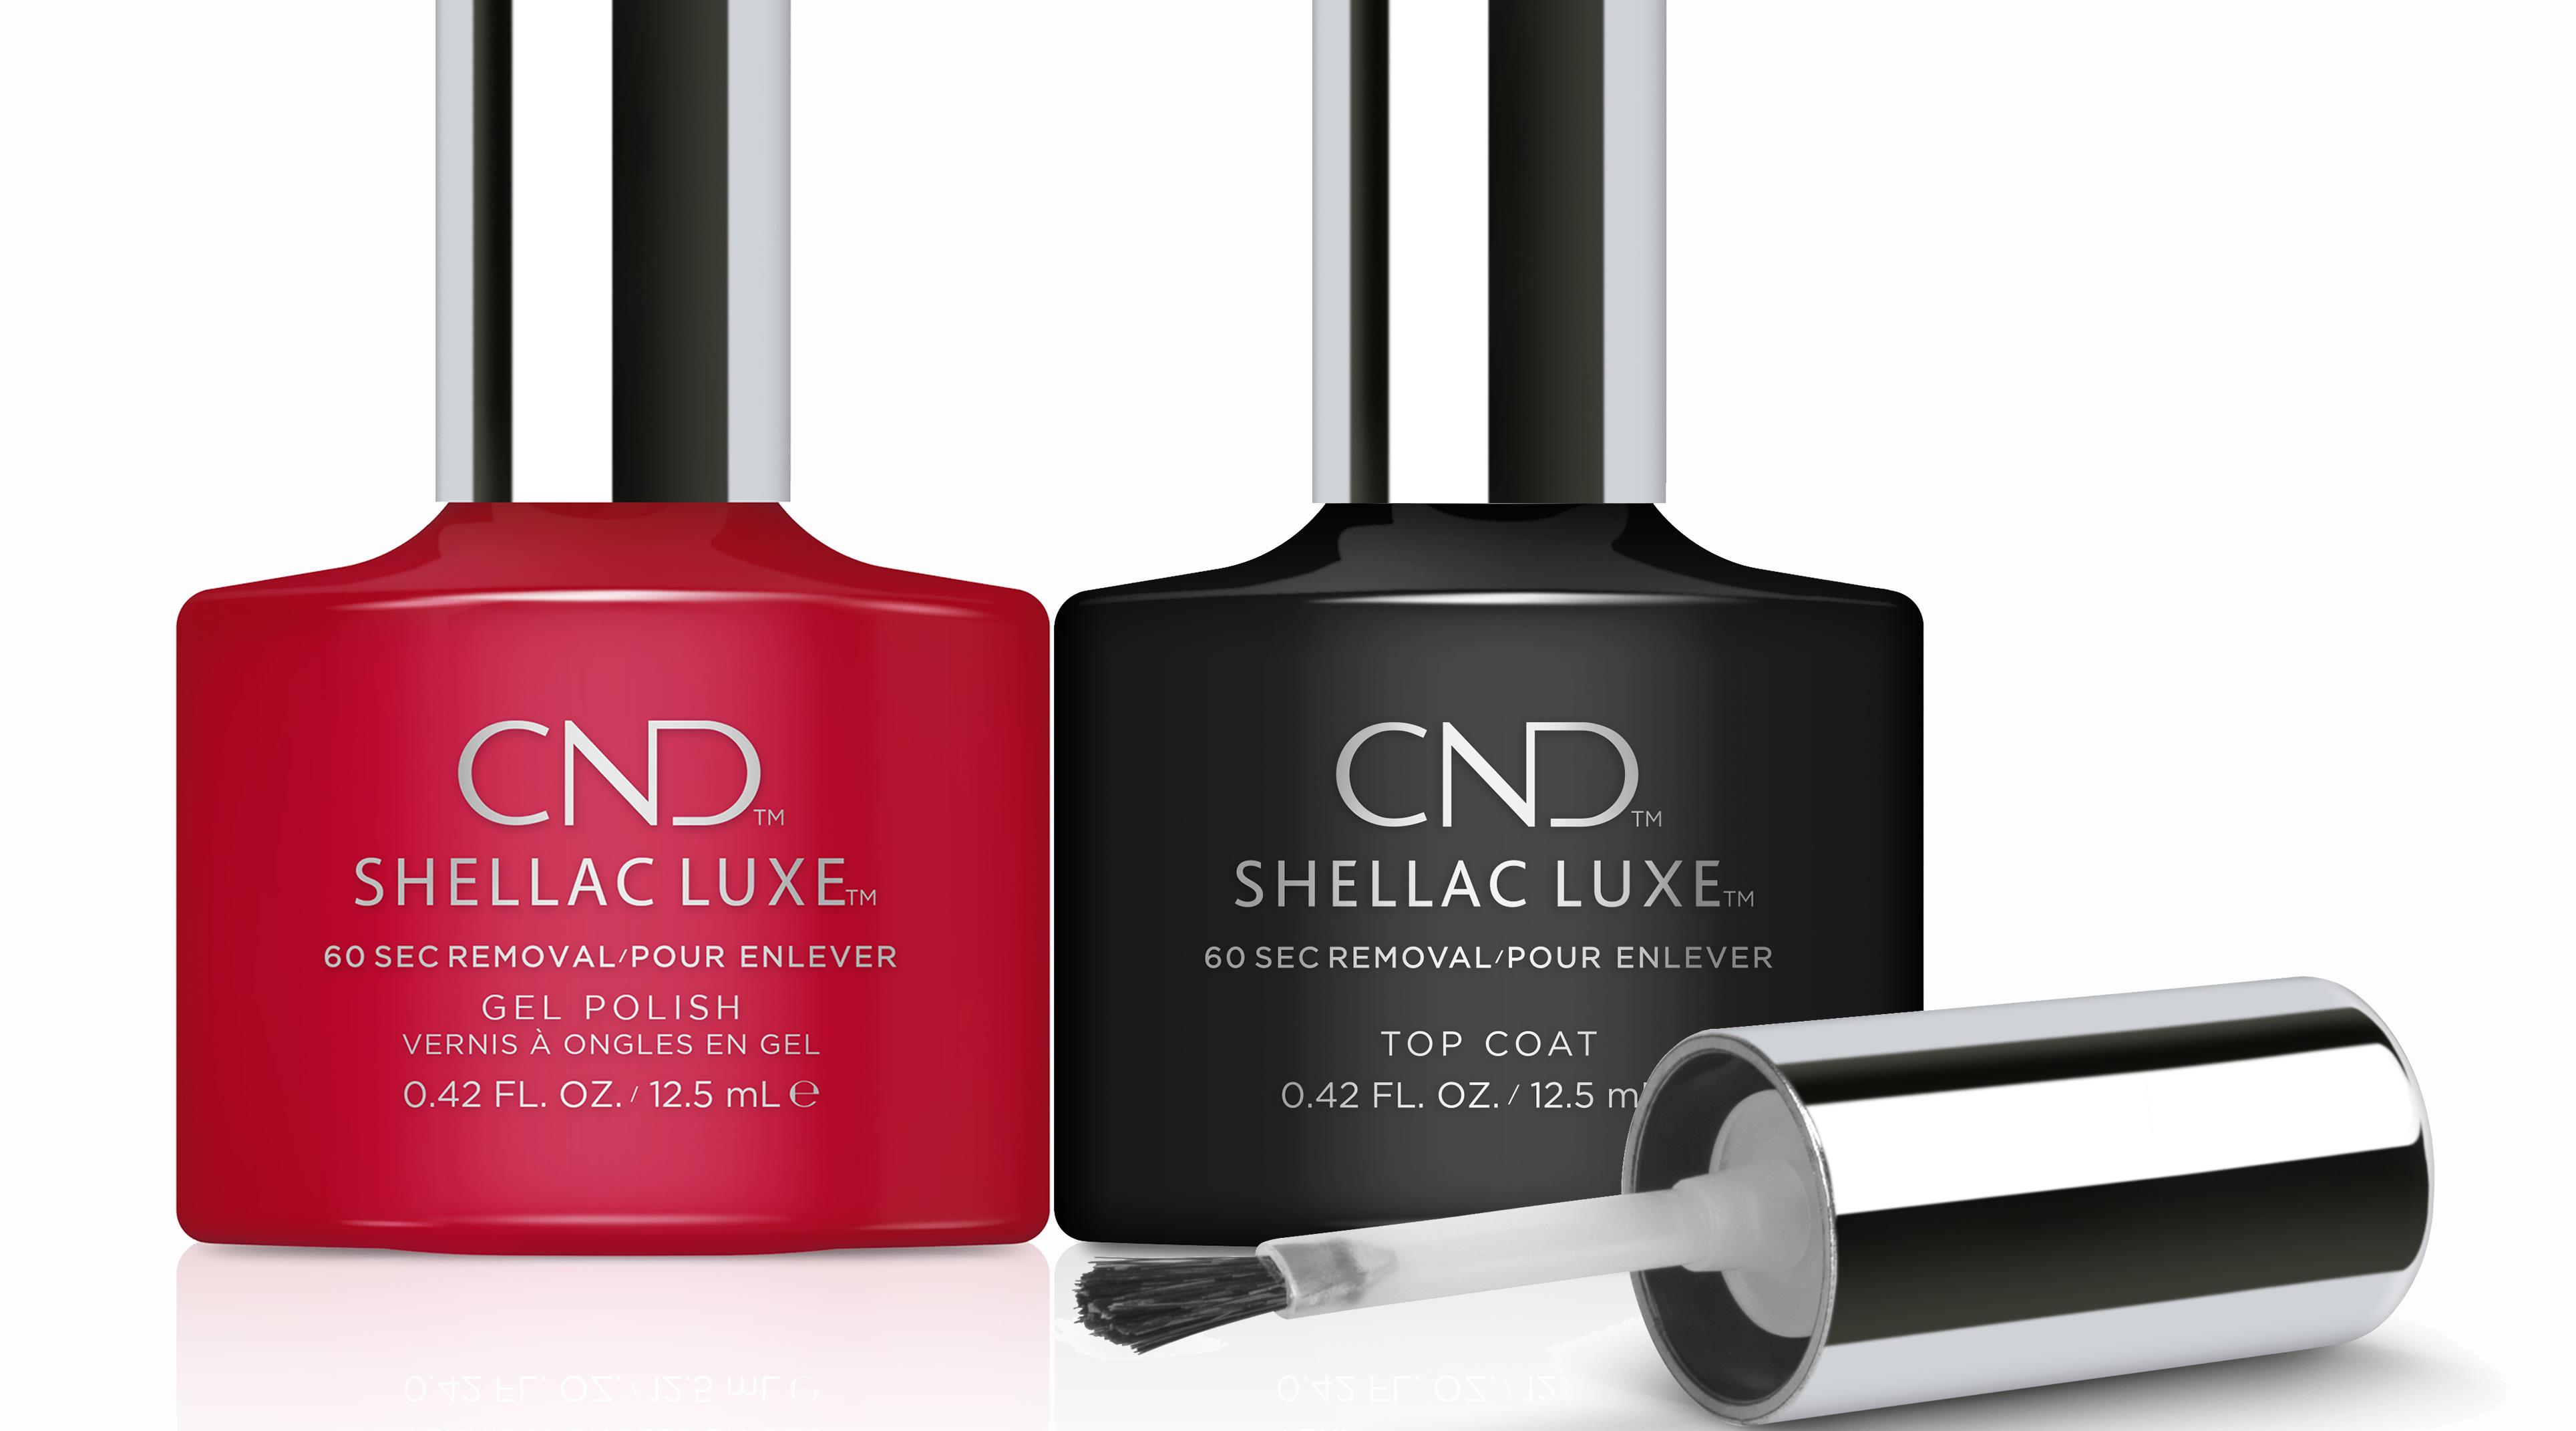 CND launches 60-second removal new generation Shellac